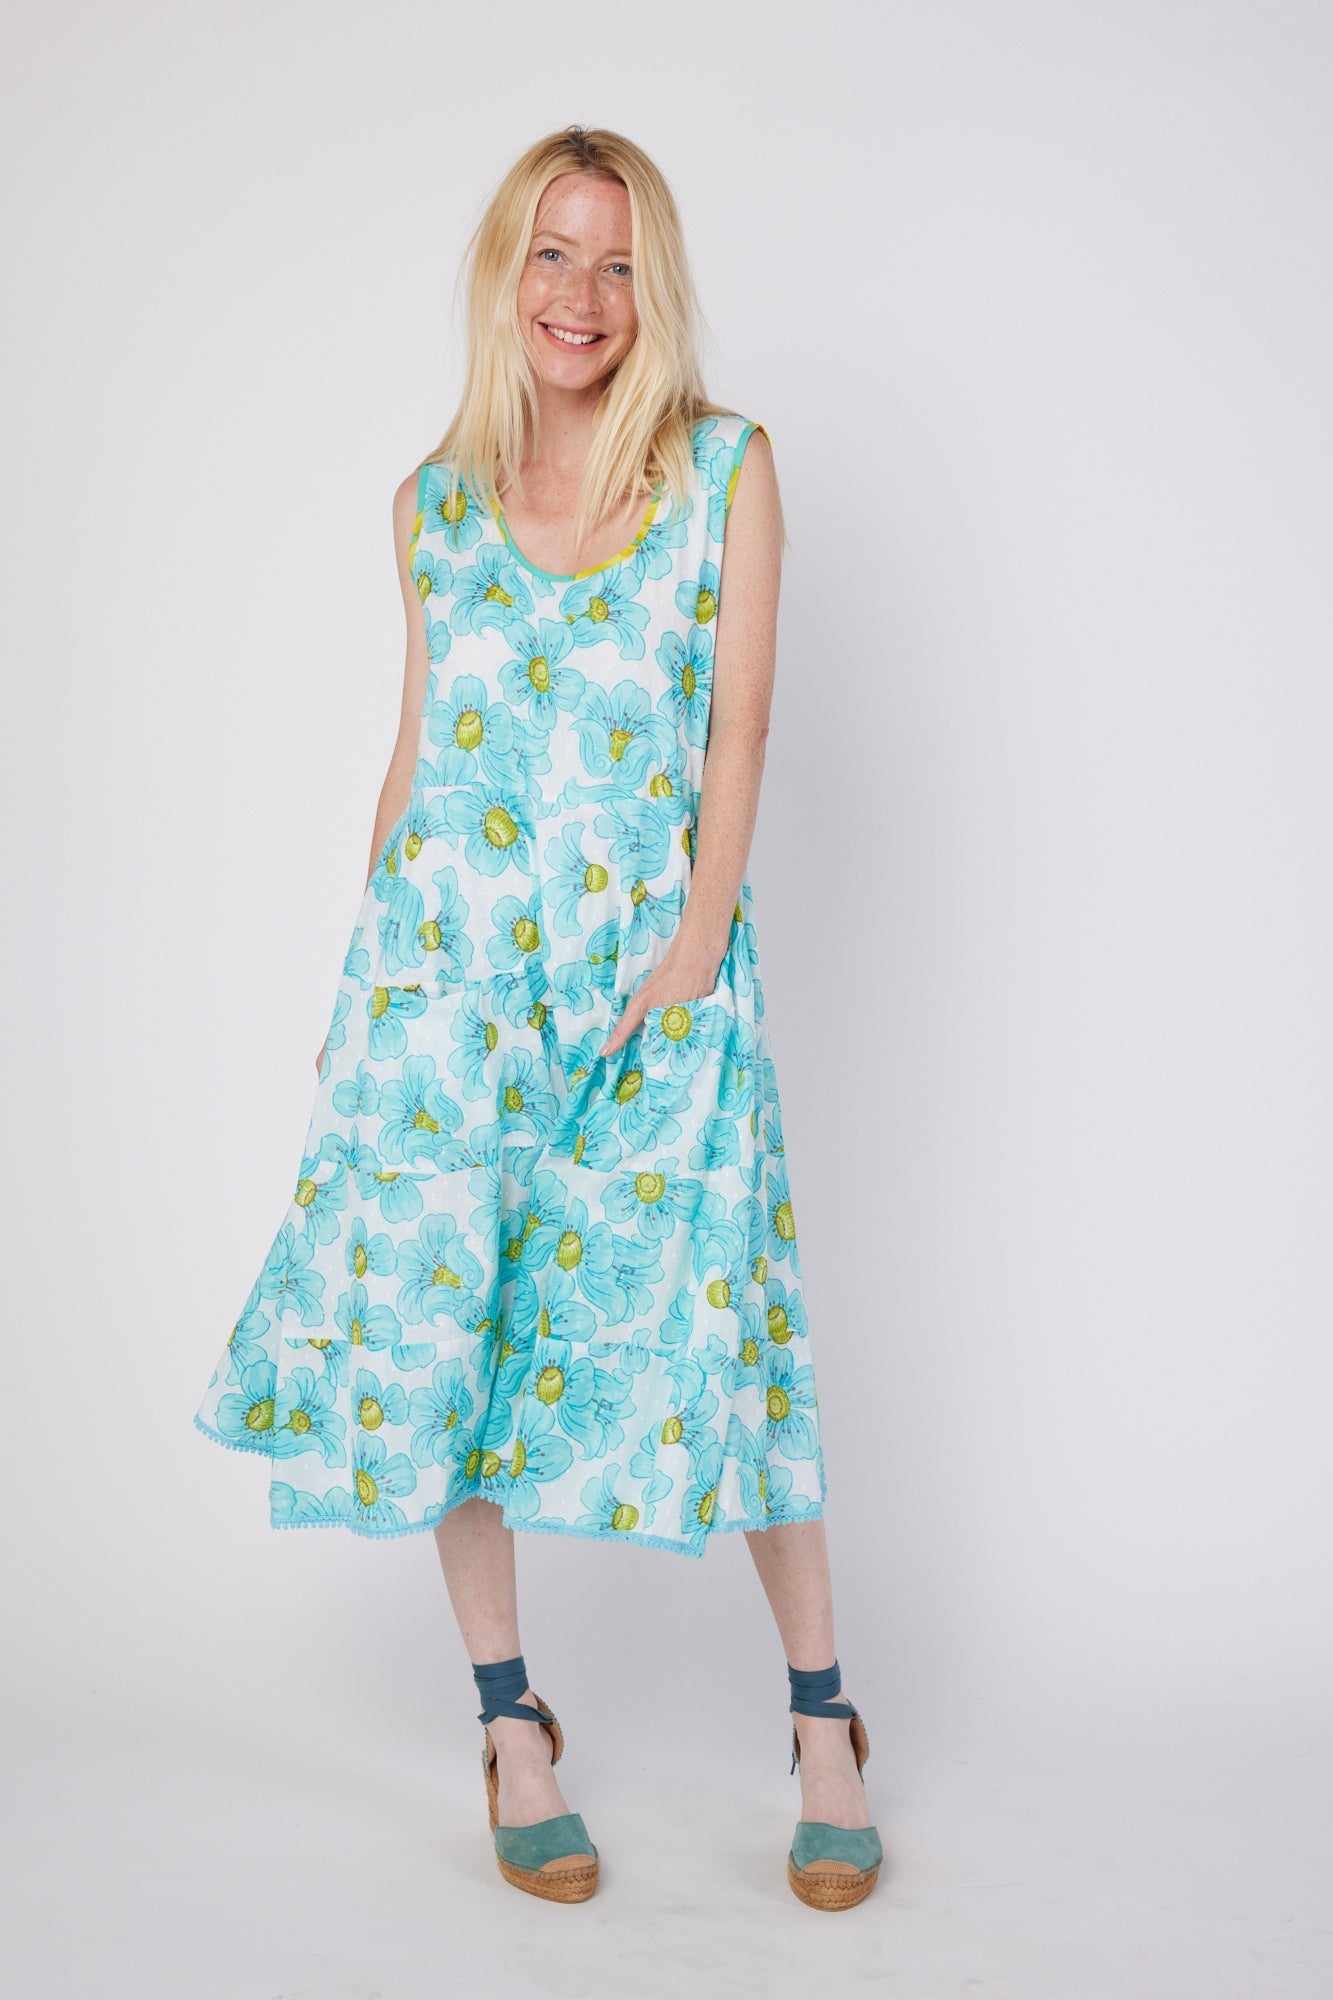 ModaPosa Karysa Sleeveless Tiered Scoop Neck Midi Sundress with Pockets in Blue Floral . Discover women's resort dresses and lifestyle clothing inspired by the Mediterranean. Free worldwide shipping available!